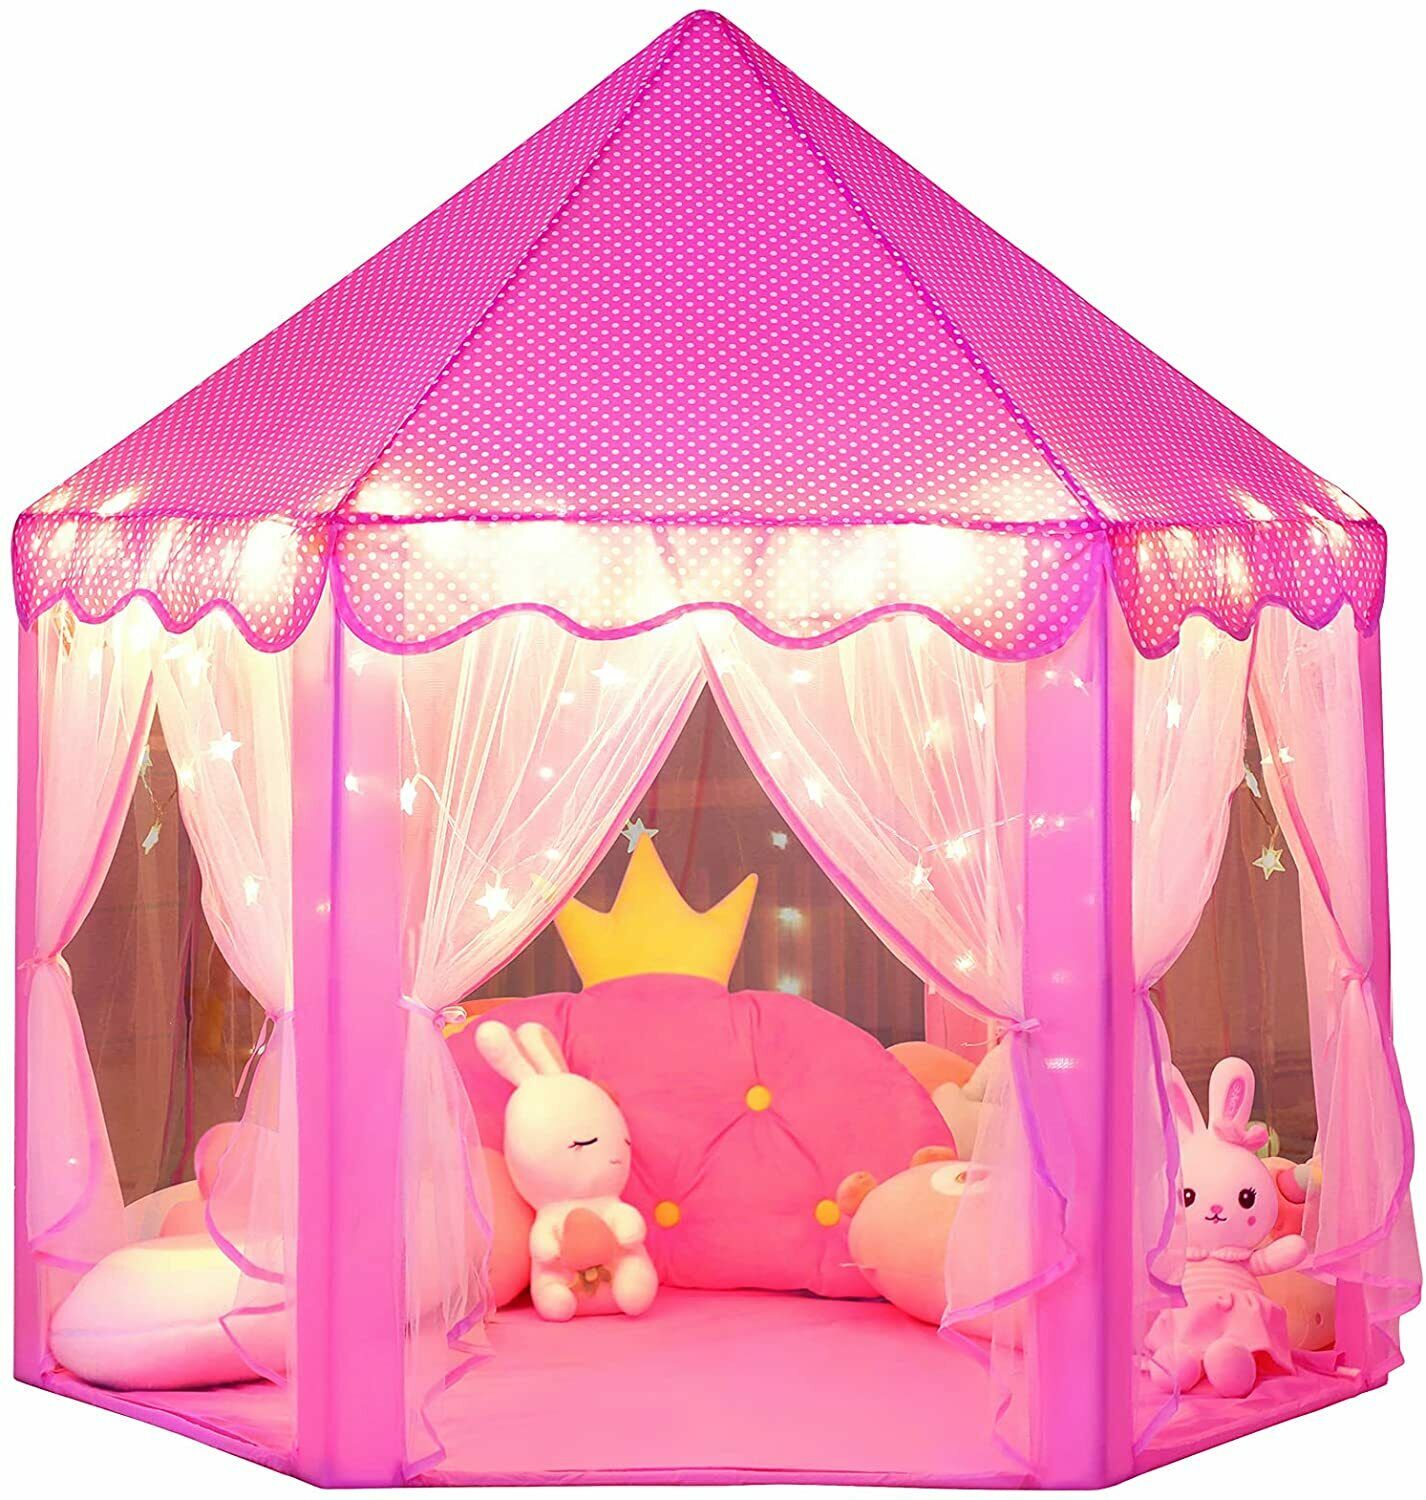 Princess Castle Play Tent for Girls Large Kids Playhouse with Star Lights US